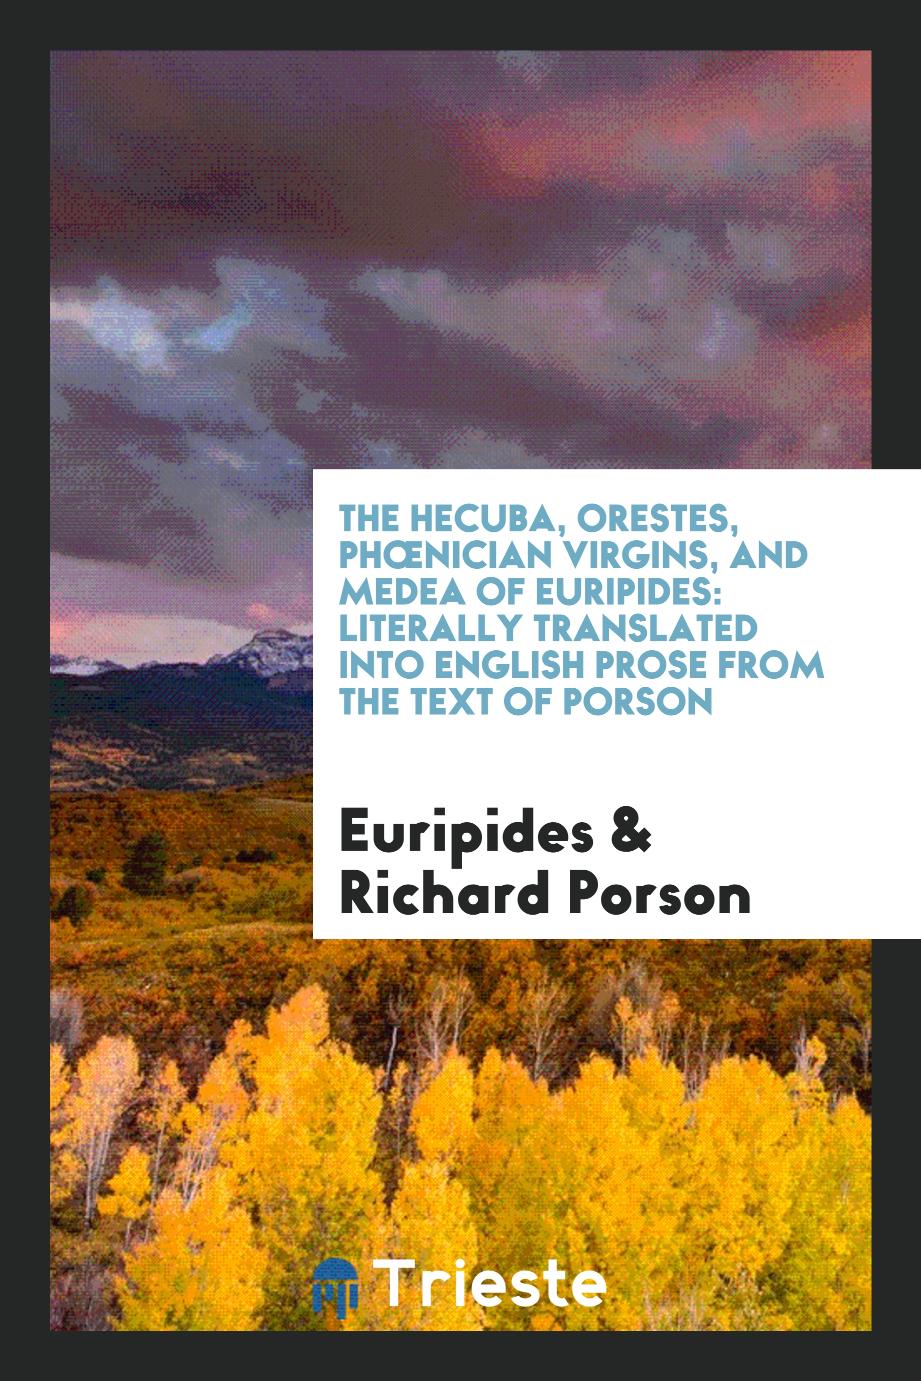 The Hecuba, Orestes, PhœNician Virgins, and Medea of Euripides: Literally Translated into English Prose from the Text of Porson